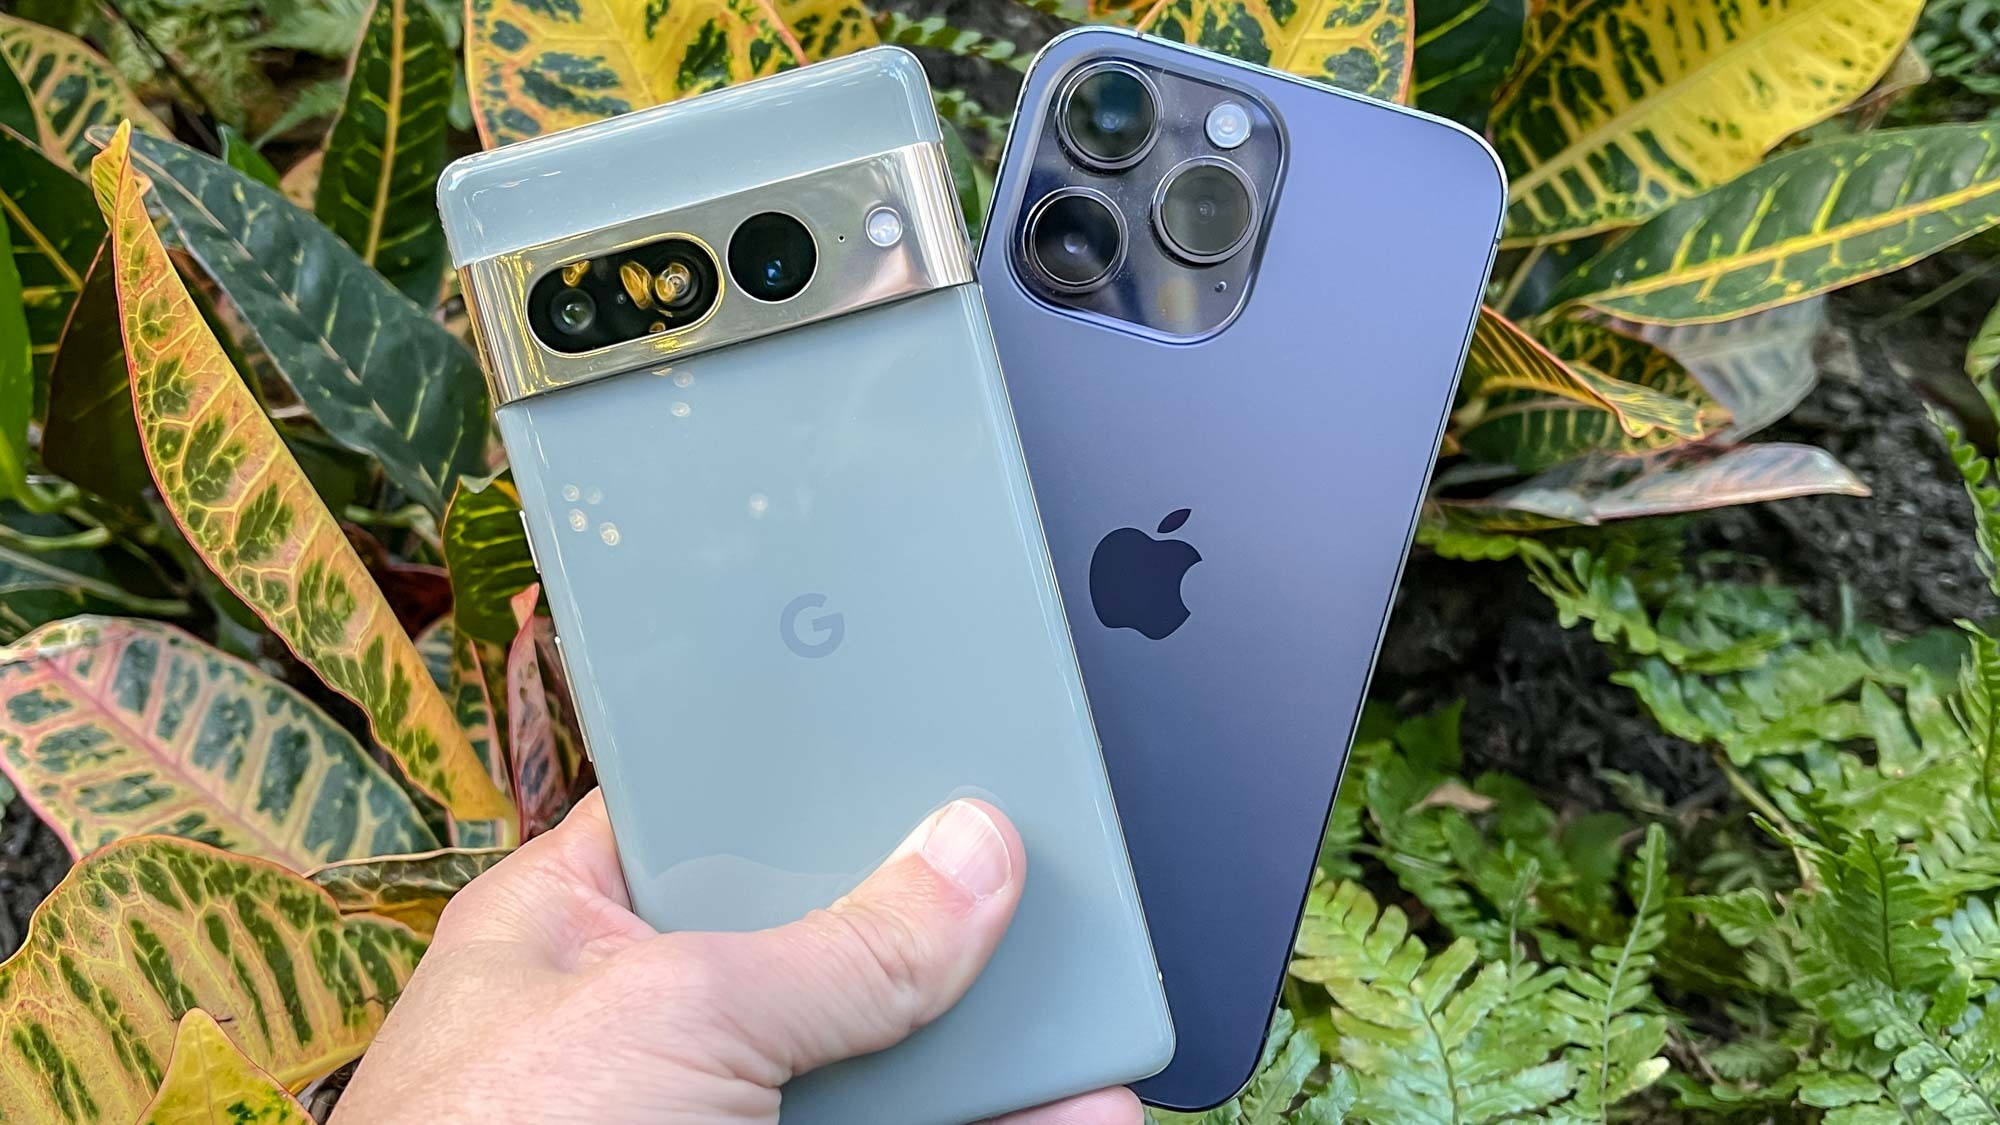 Google Pixel 7 Pro review: Taking the iPhone 14 Pro head on